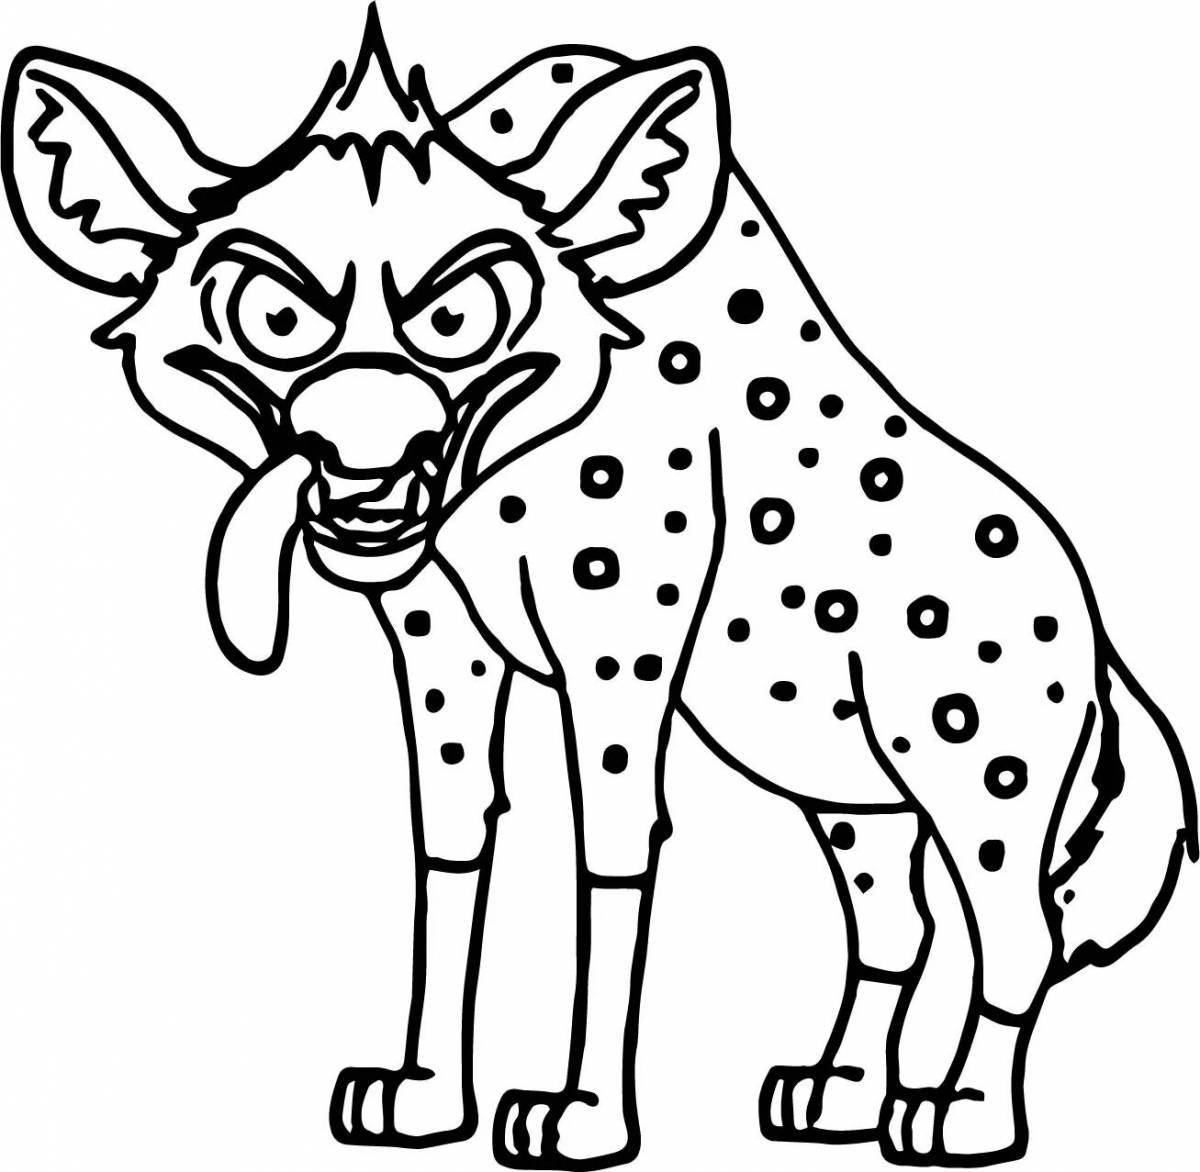 Exquisite hyena coloring book for kids